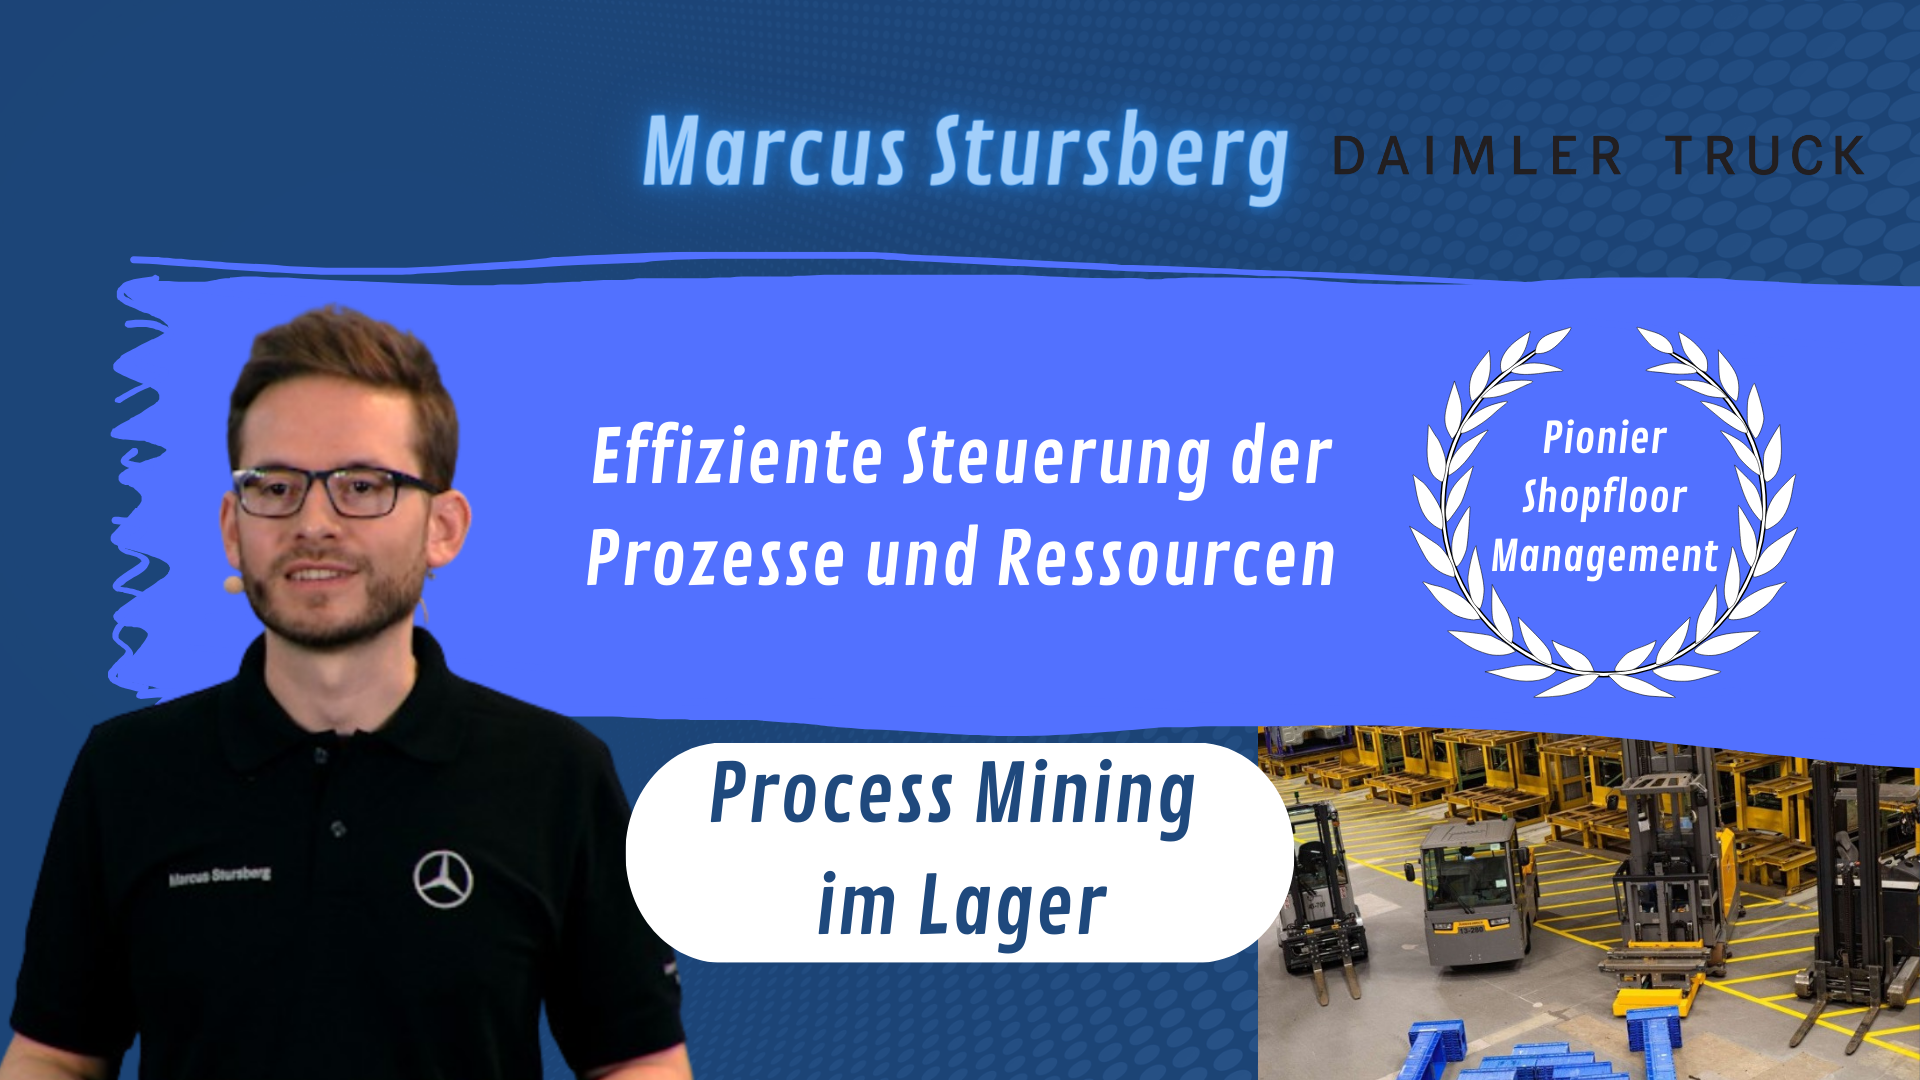 DIGITAL - Process Mining in the warehouse with Marcus Stursberg